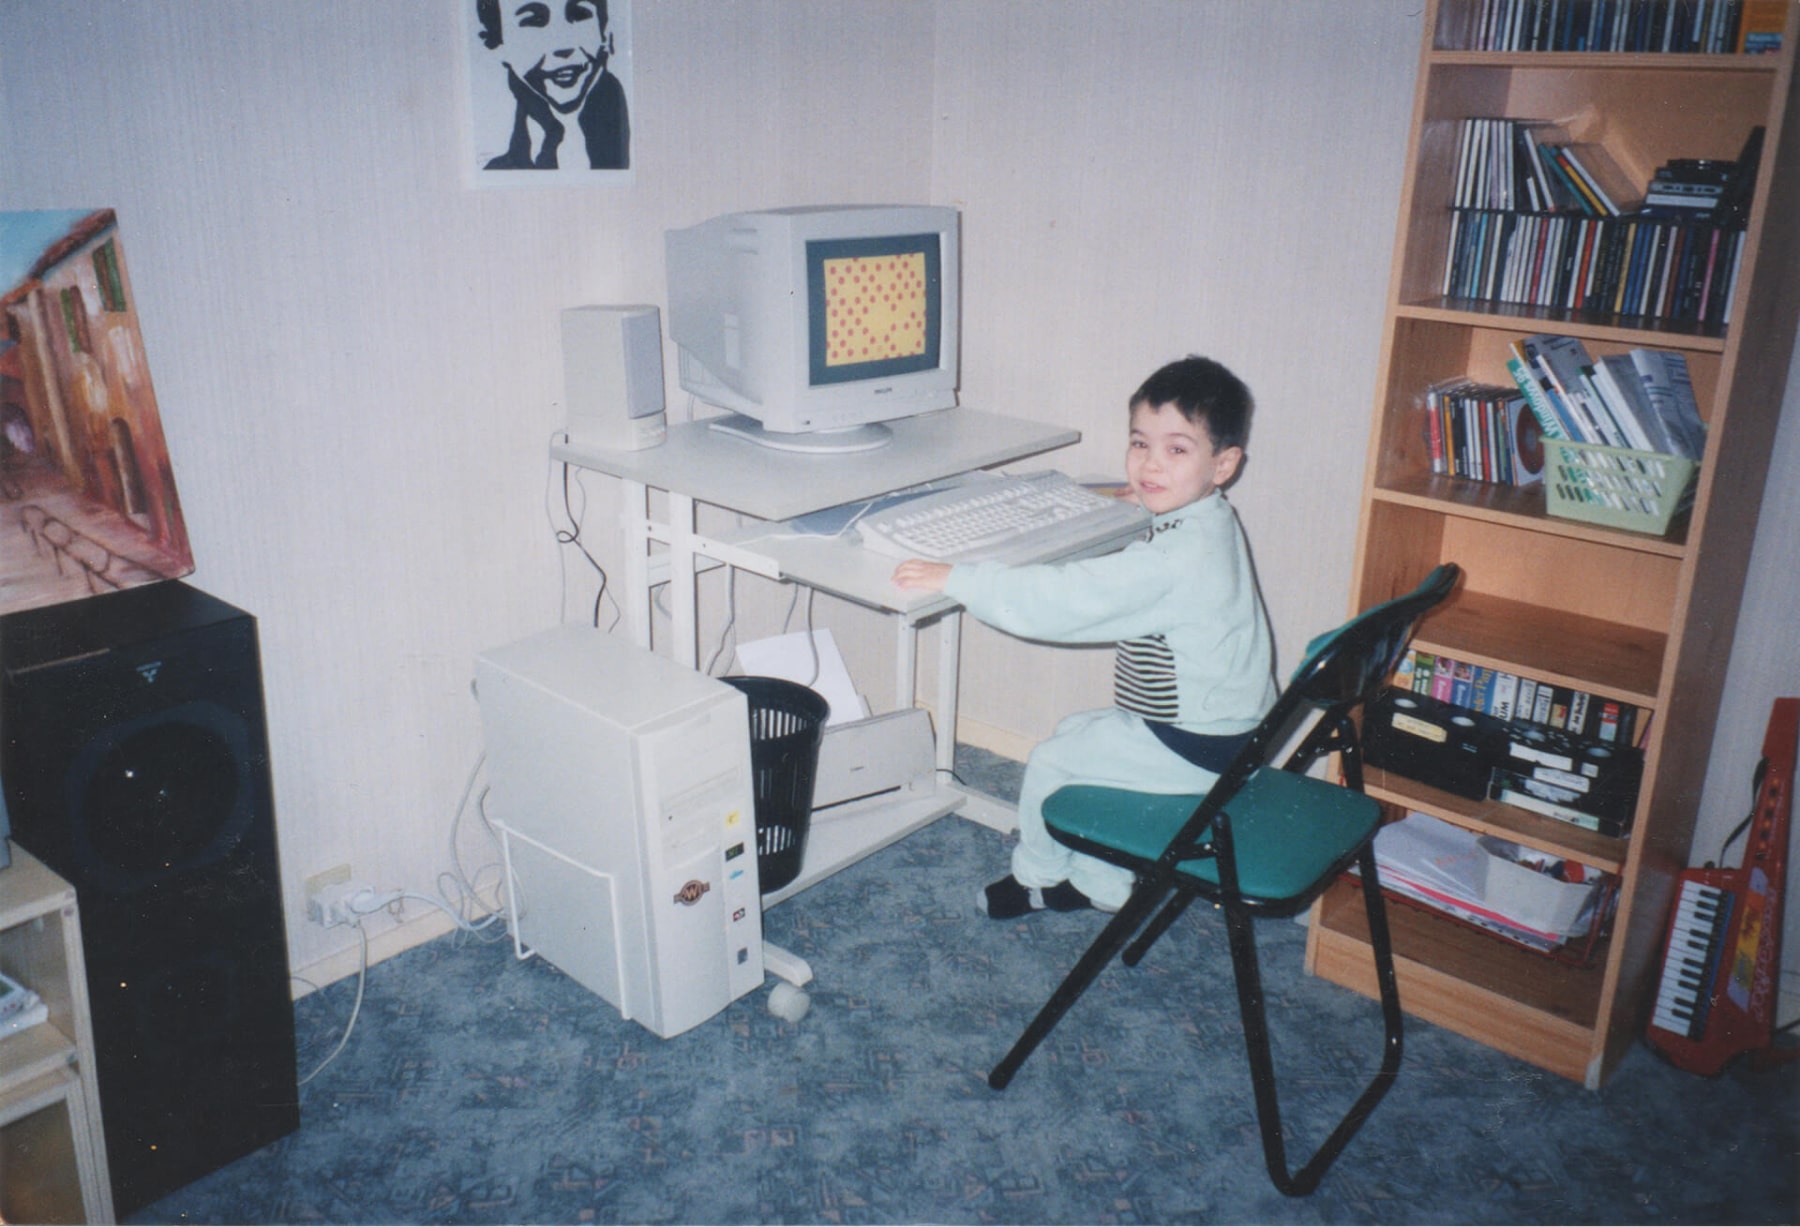 A 4 year old me playing with an old school computer.